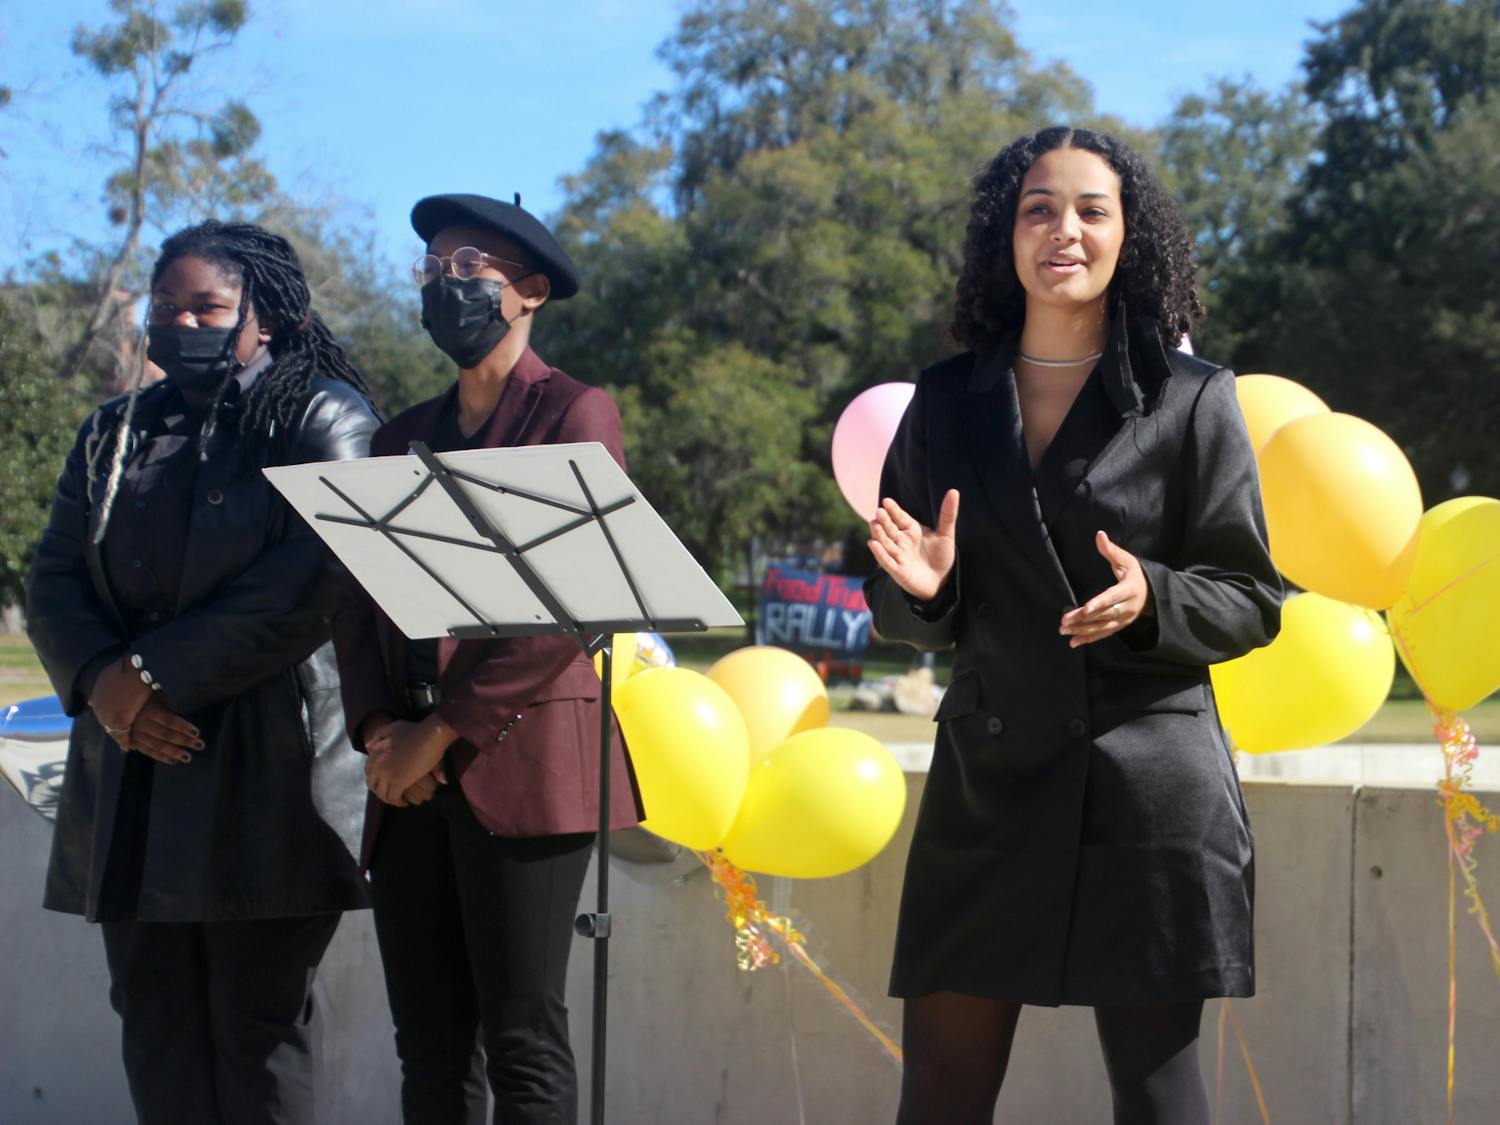 Gabrielle Adekunle (right), Change Party’s presidential nominee, addresses a crowd outside the Reitz Union North Lawn on Tuesday, Feb. 1. Beside her is Kenya Warner (left), treasurer nominee, and Dayanna Peek (middle), vice presidential nominee.